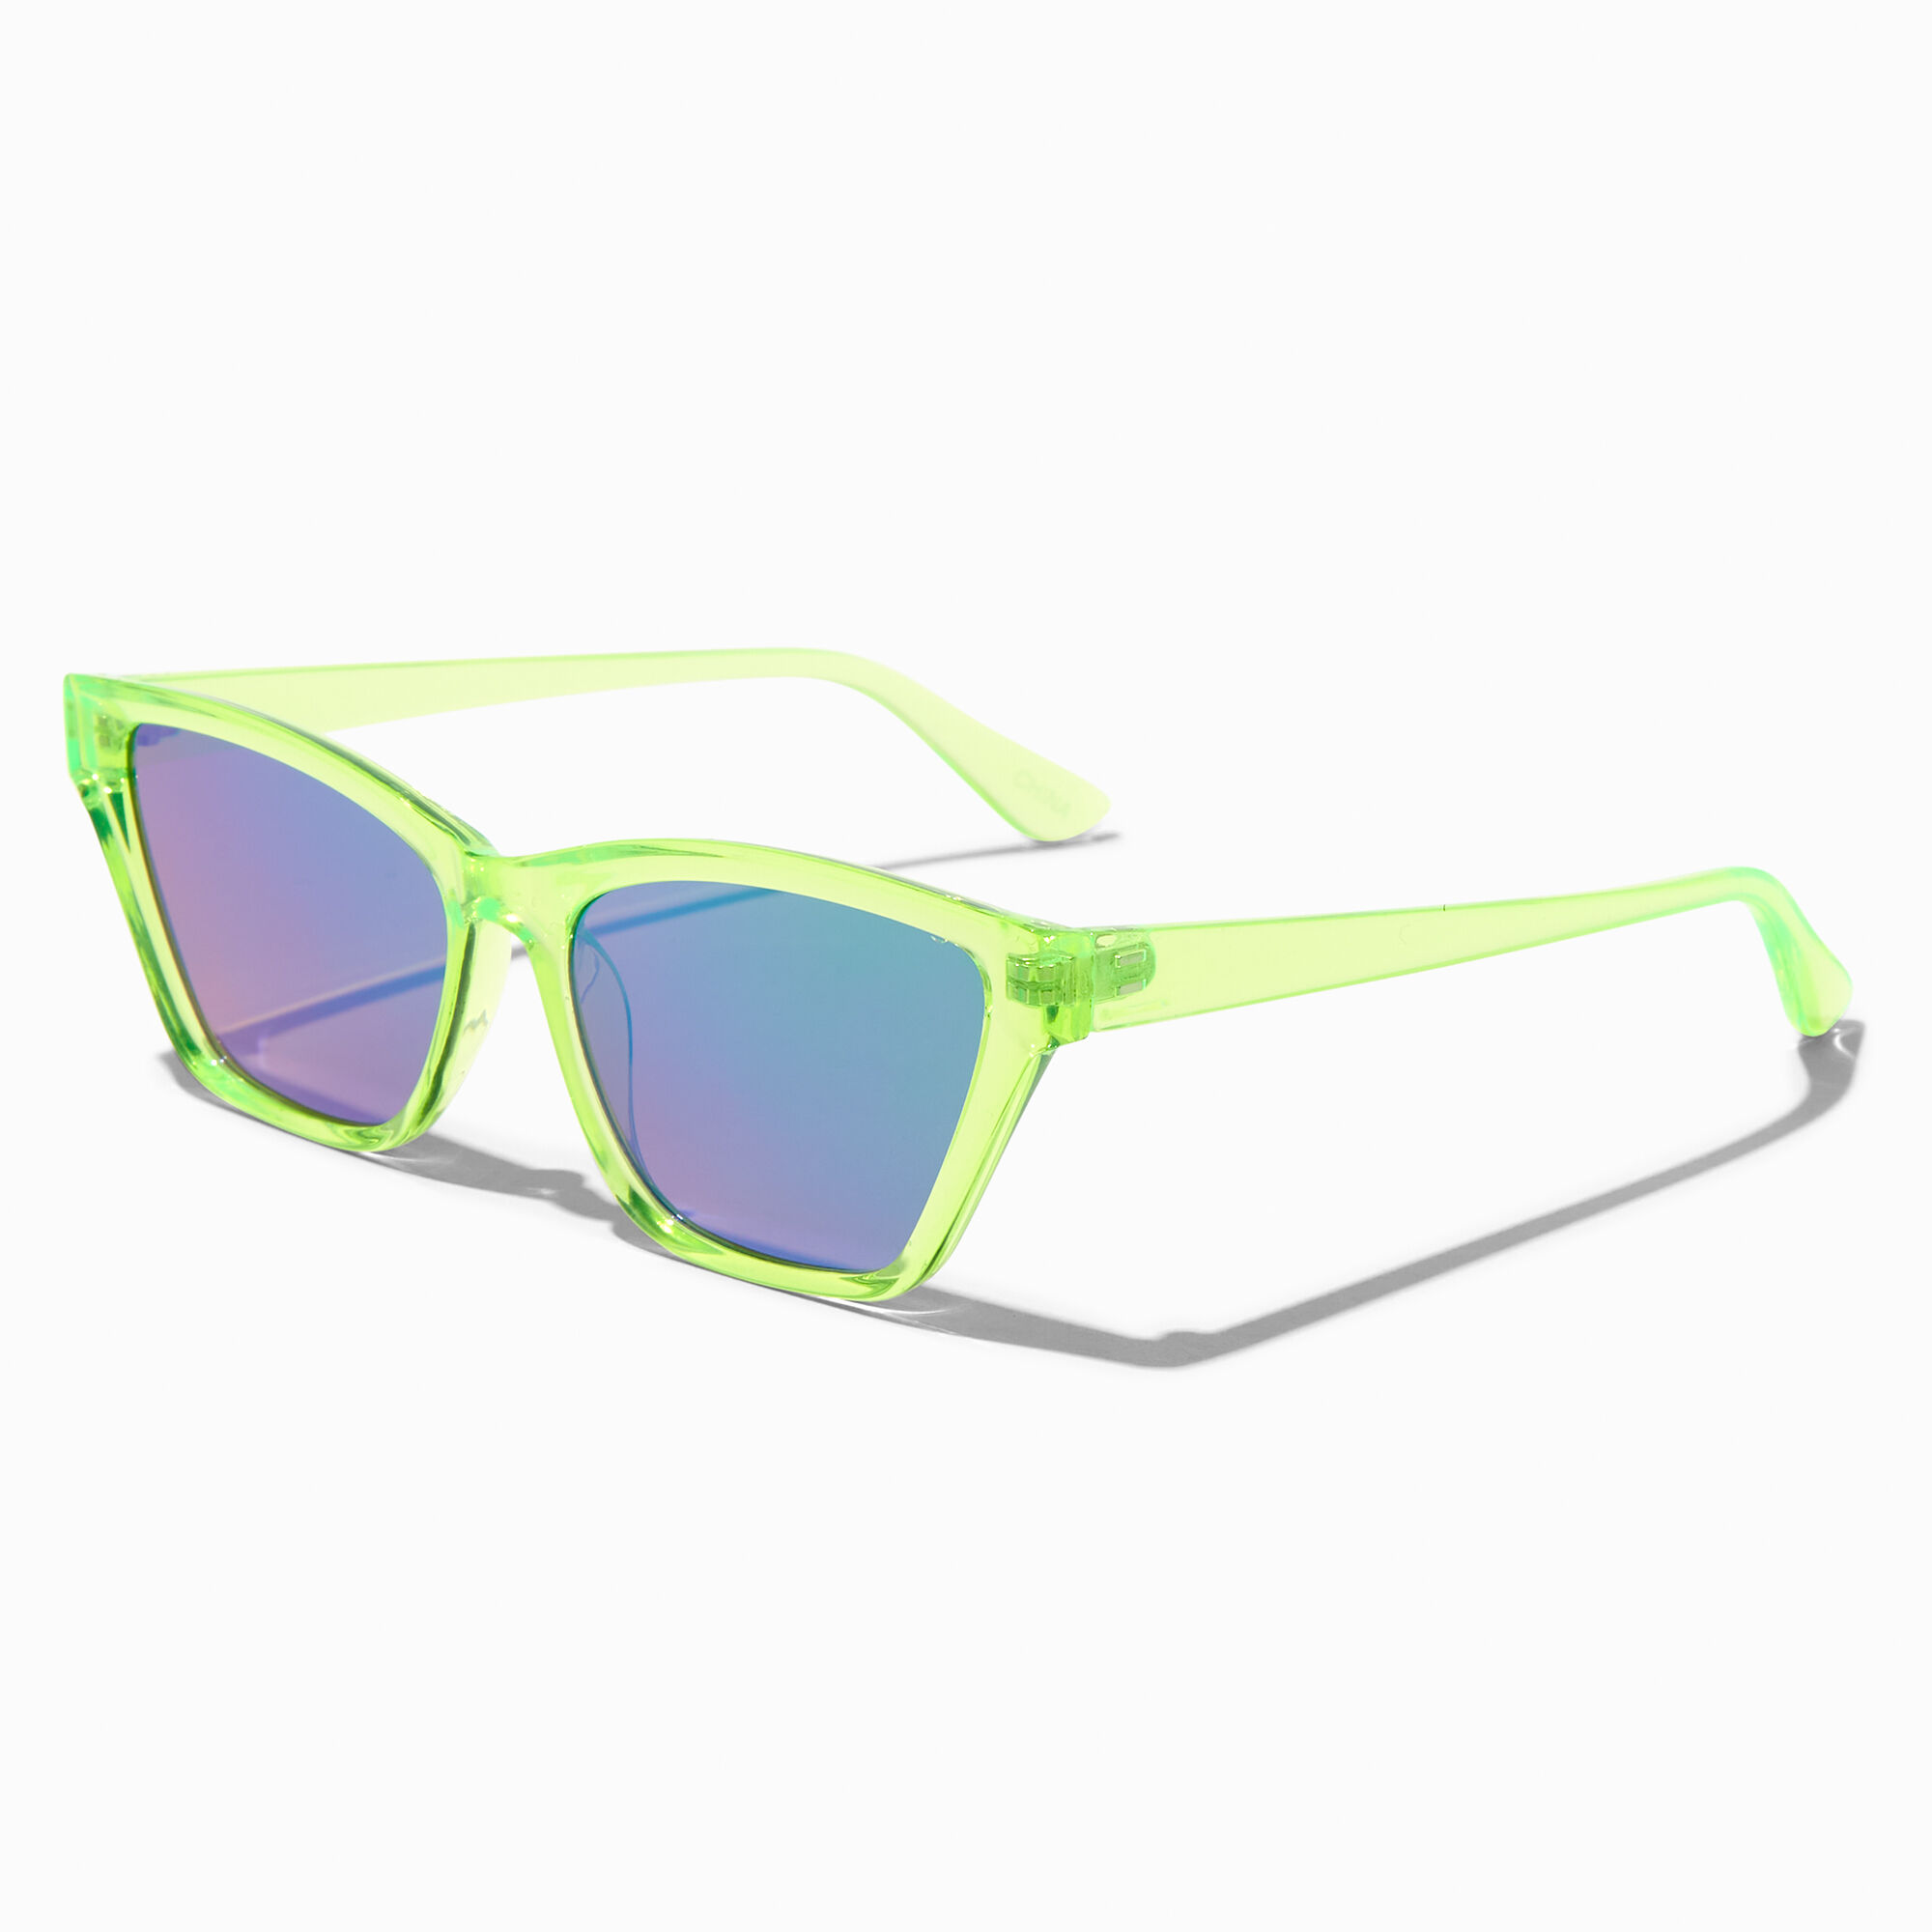 View Claires Neon Cat Eye Sunglasses Green information